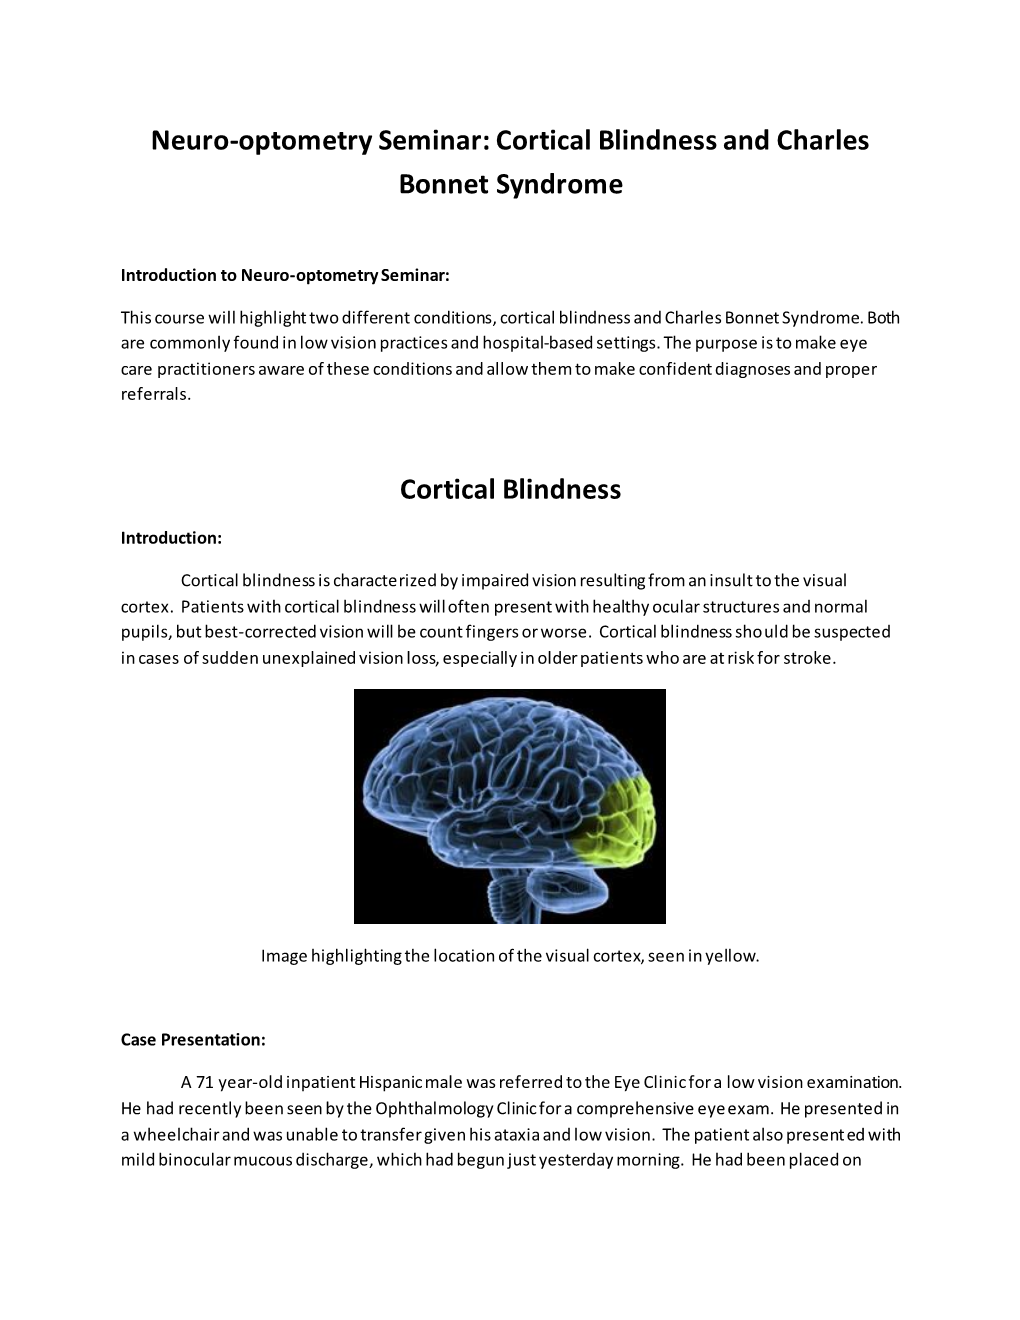 Cortical Blindness and Charles Bonnet Syndrome